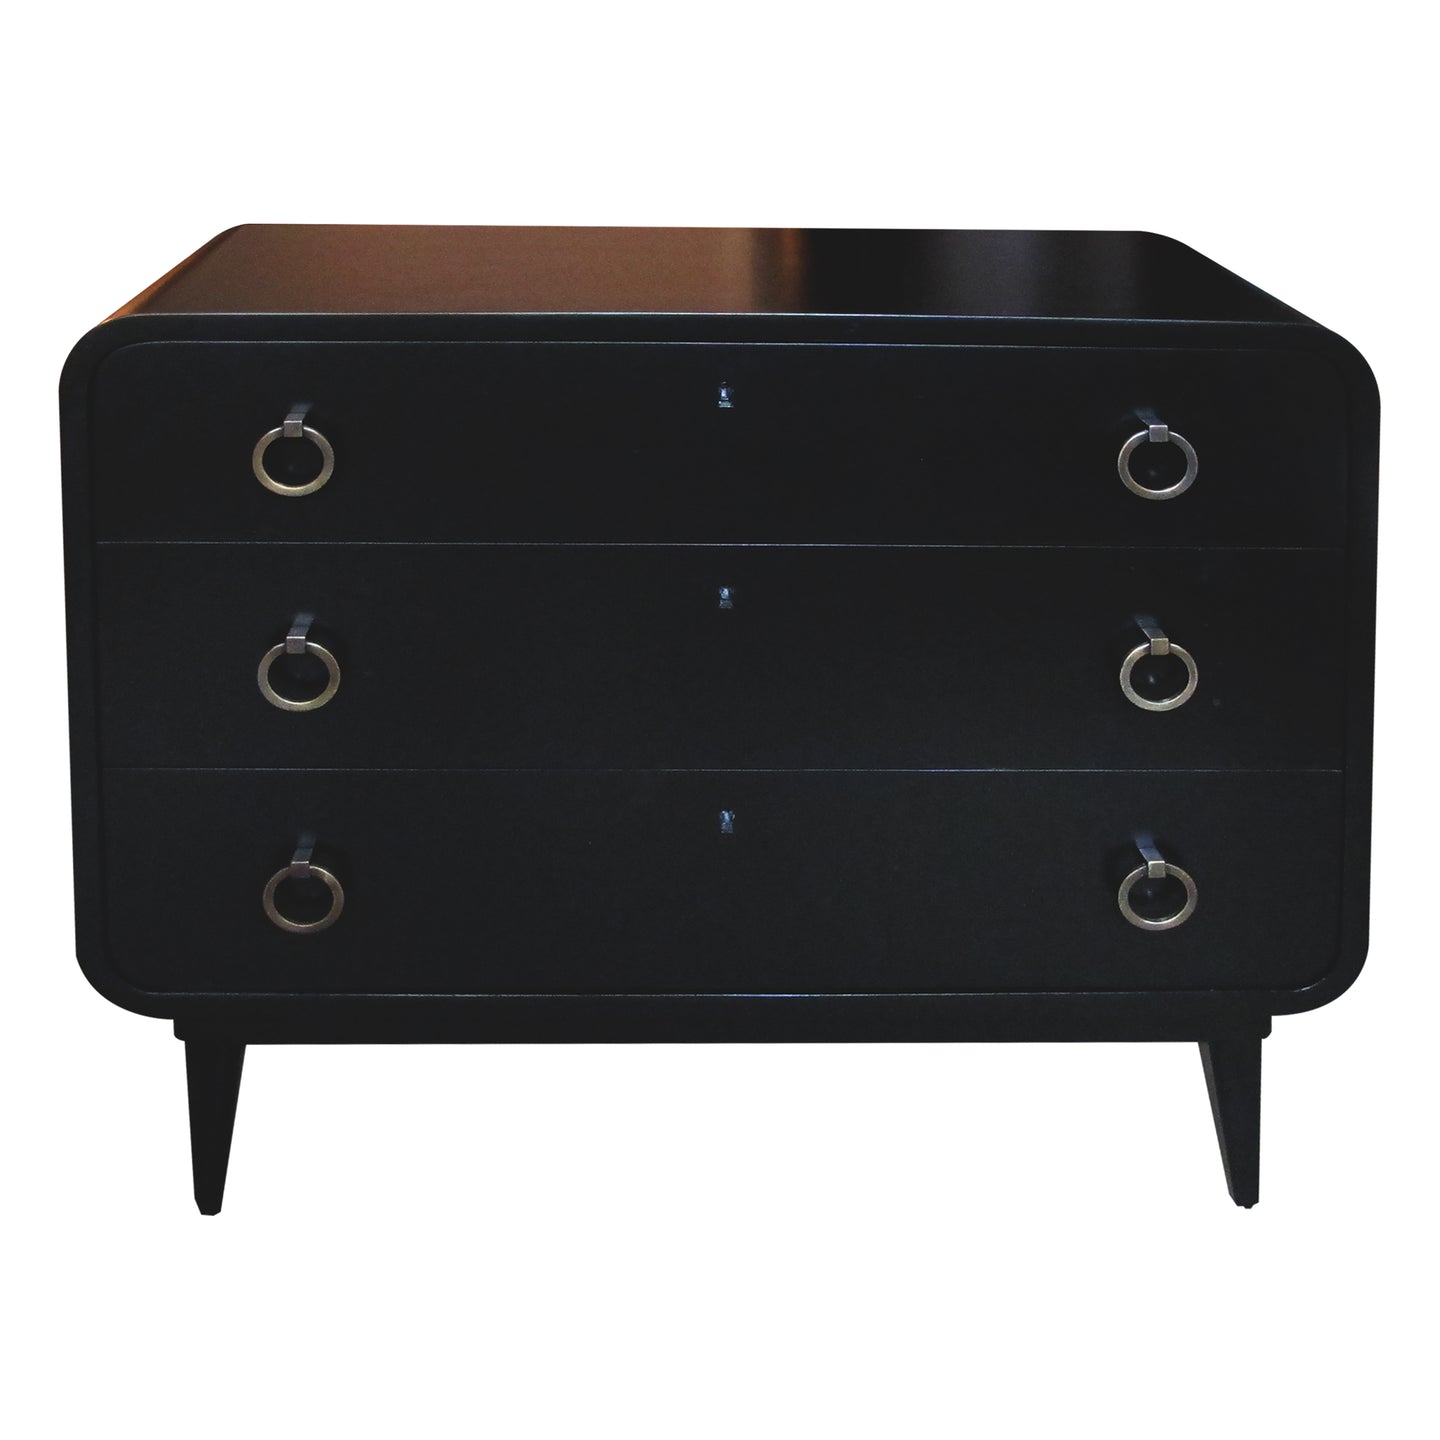 1950s Swedish, functionalist ebonised chest of drawer with curved edges